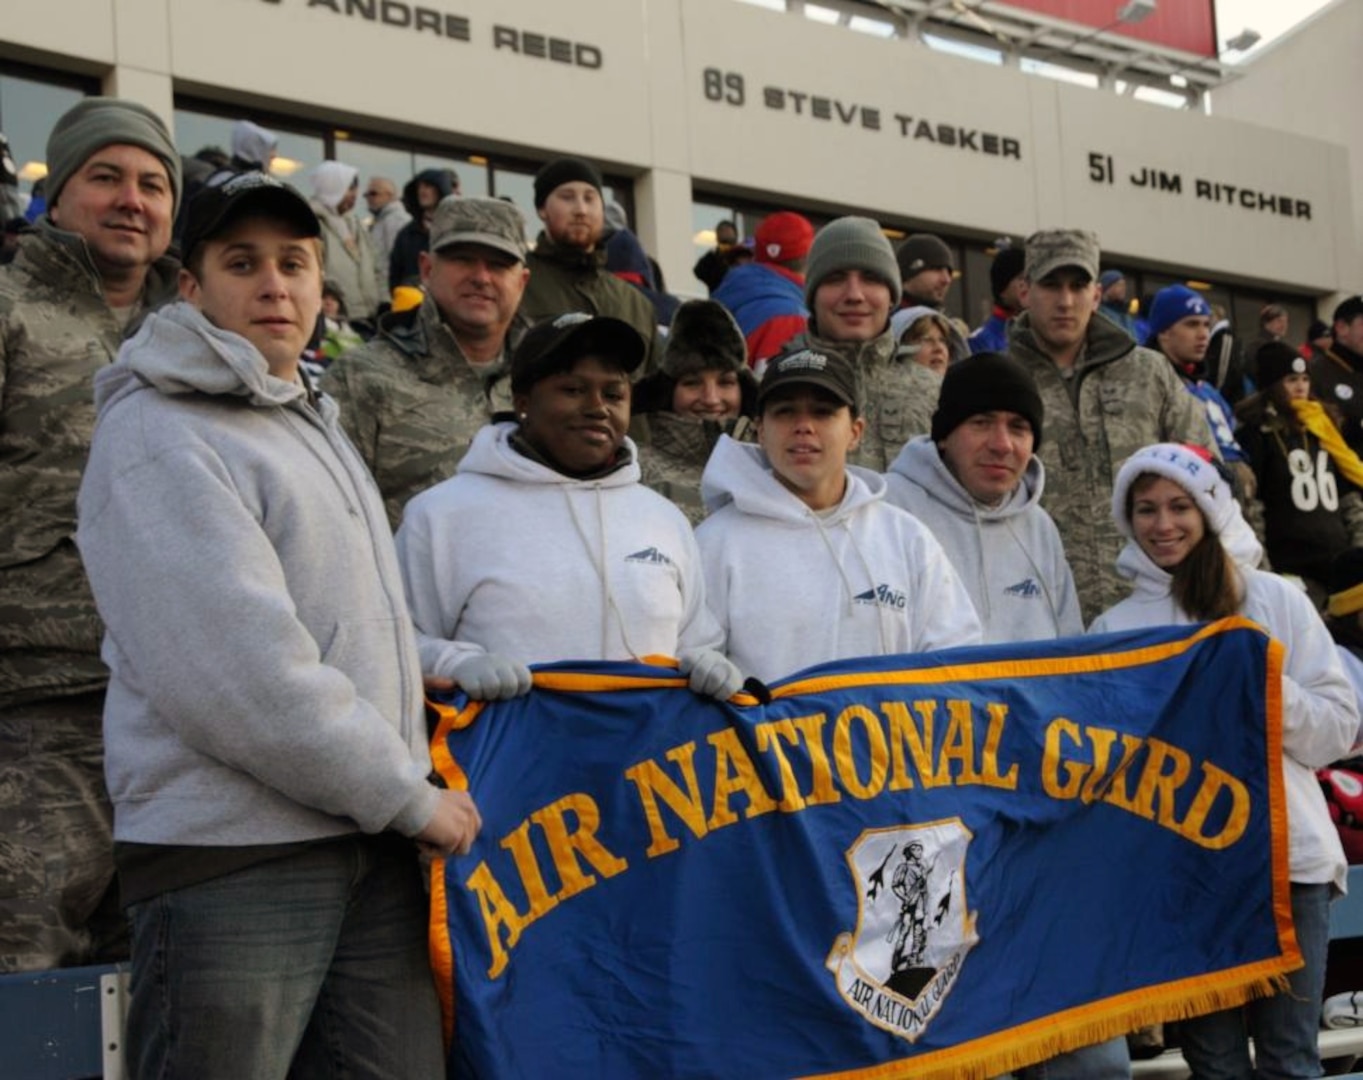 New enlistees in the New York Air National Guard's 107th Airlift Wing enjoy the Buffalo Bills game from the front row after participating in a mid-field enlistment ceremony prior to the game on Nov. 28, 2010. After the ceremony, the enlistees were joined by existing unit members to cheer on the Bills. Front row left to right are: Airmen 1st Class Daniel Treblett, Christina Swanson, Cara Sturdivant and Joanna Vail, and back row left to right, Tech. Sgt. Patrick Paolini, Staff Sgt. Peter Dean, Tech. Sgt. Charity Edwards, Senior Airmen Robert Kurzdorfer and Paul Boser.